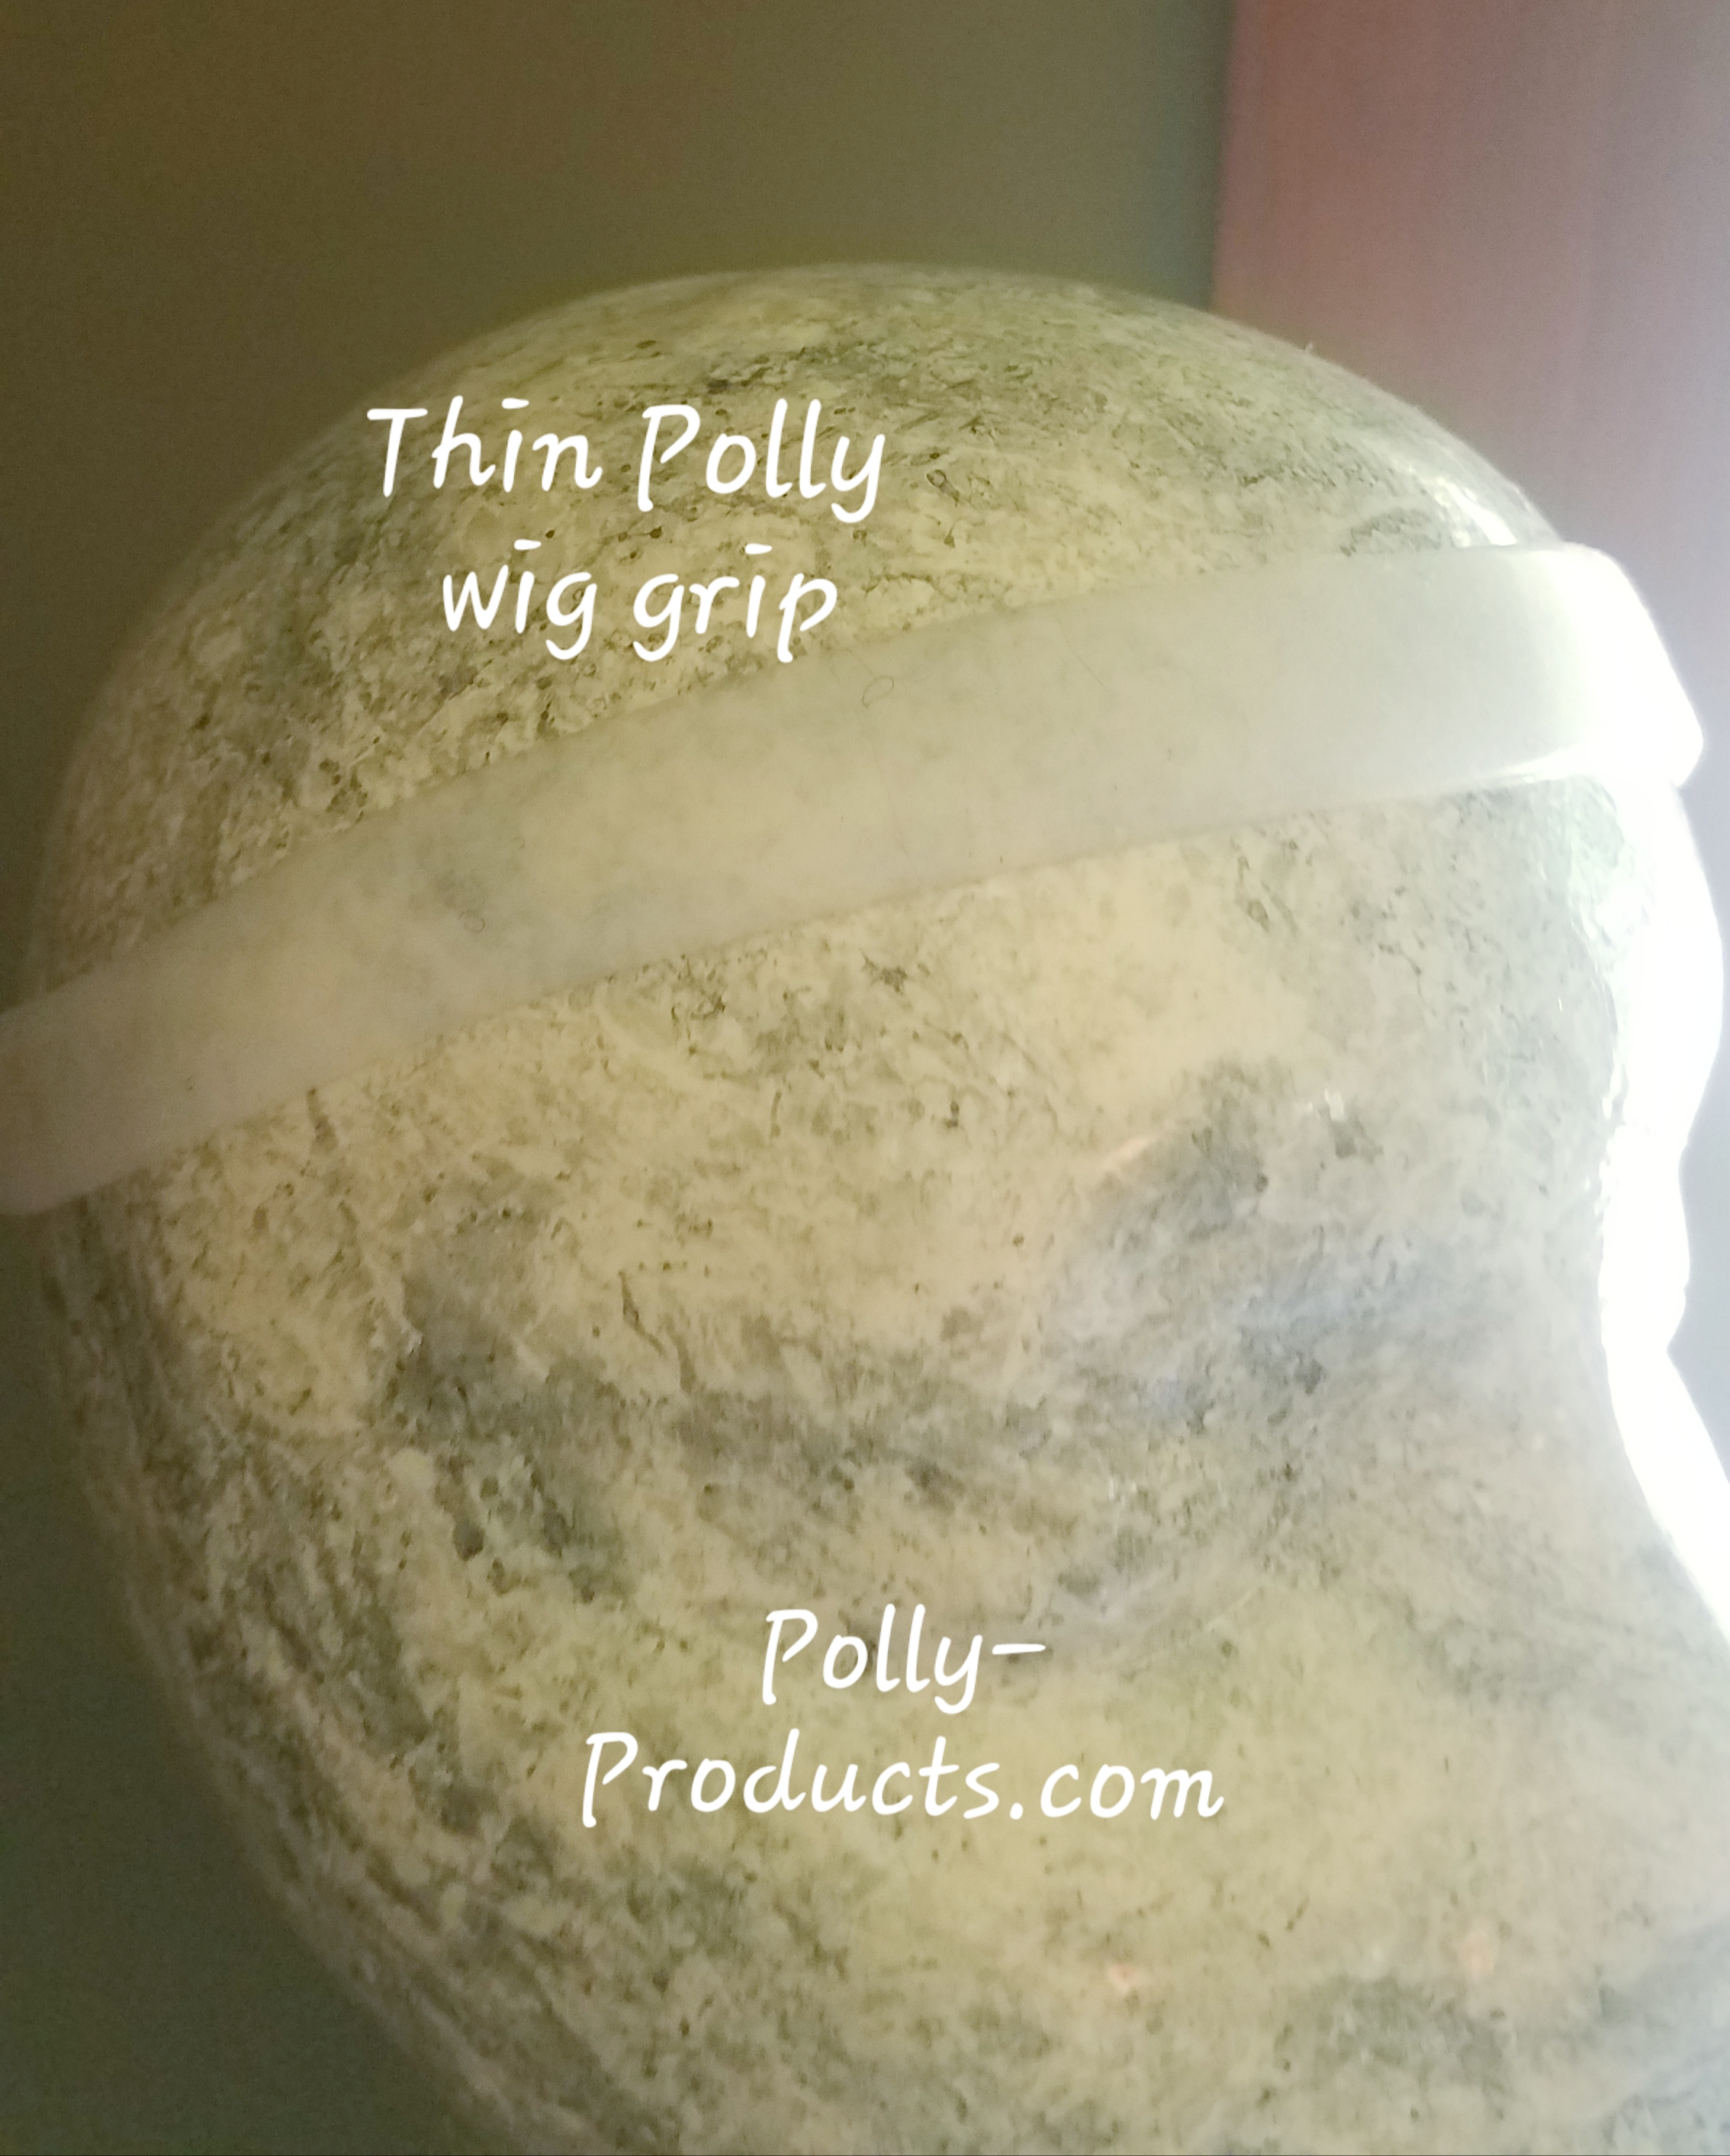 #TPWG615 THIN POLLY WIG GRIP tm BY POLLY PRODUCTS